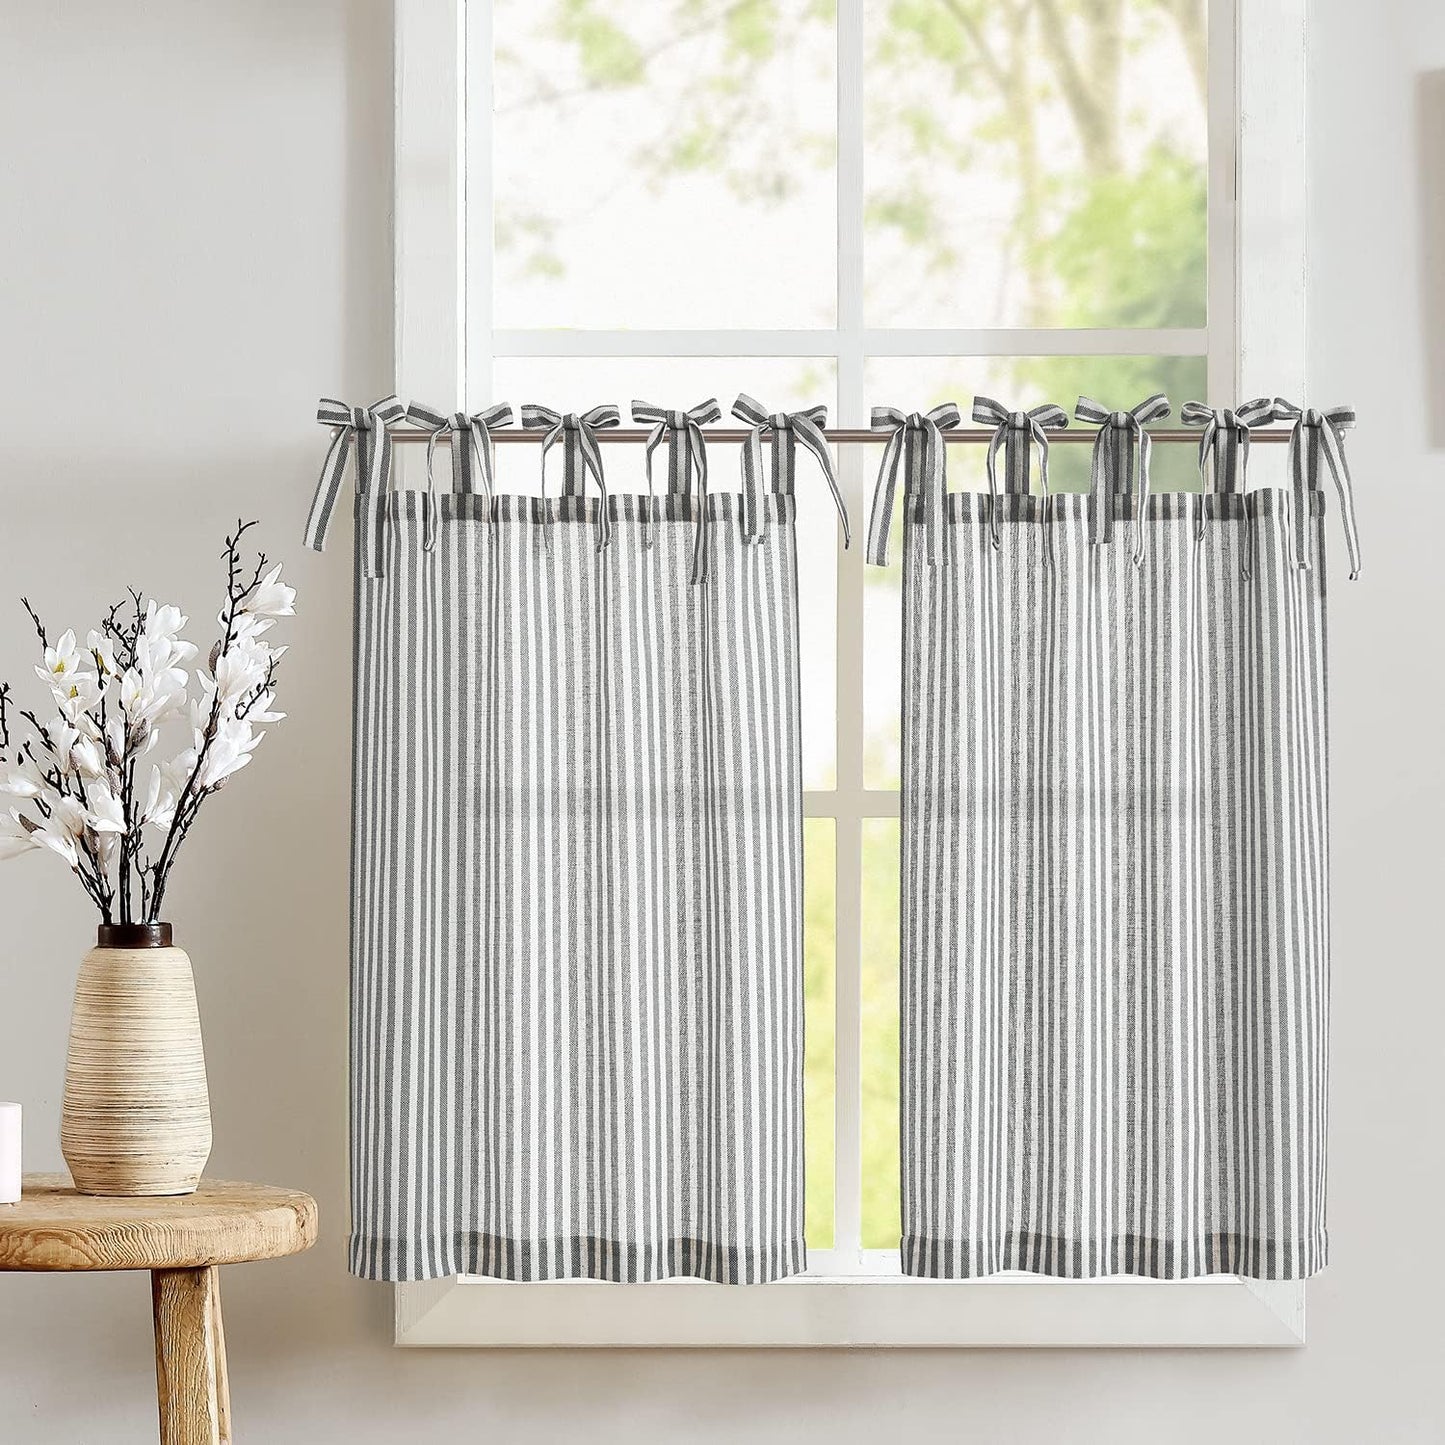 Jinchan Linen Kitchen Curtains Striped Tier Curtains Ticking Stripe Curtains Pinstripe Cafe Curtains 24 Inch Length for Living Room Bathroom Farmhouse Rustic Curtains Rod Pocket 2 Panels Tan  CKNY HOME FASHION Tie Top Striped Black W26 X L36 